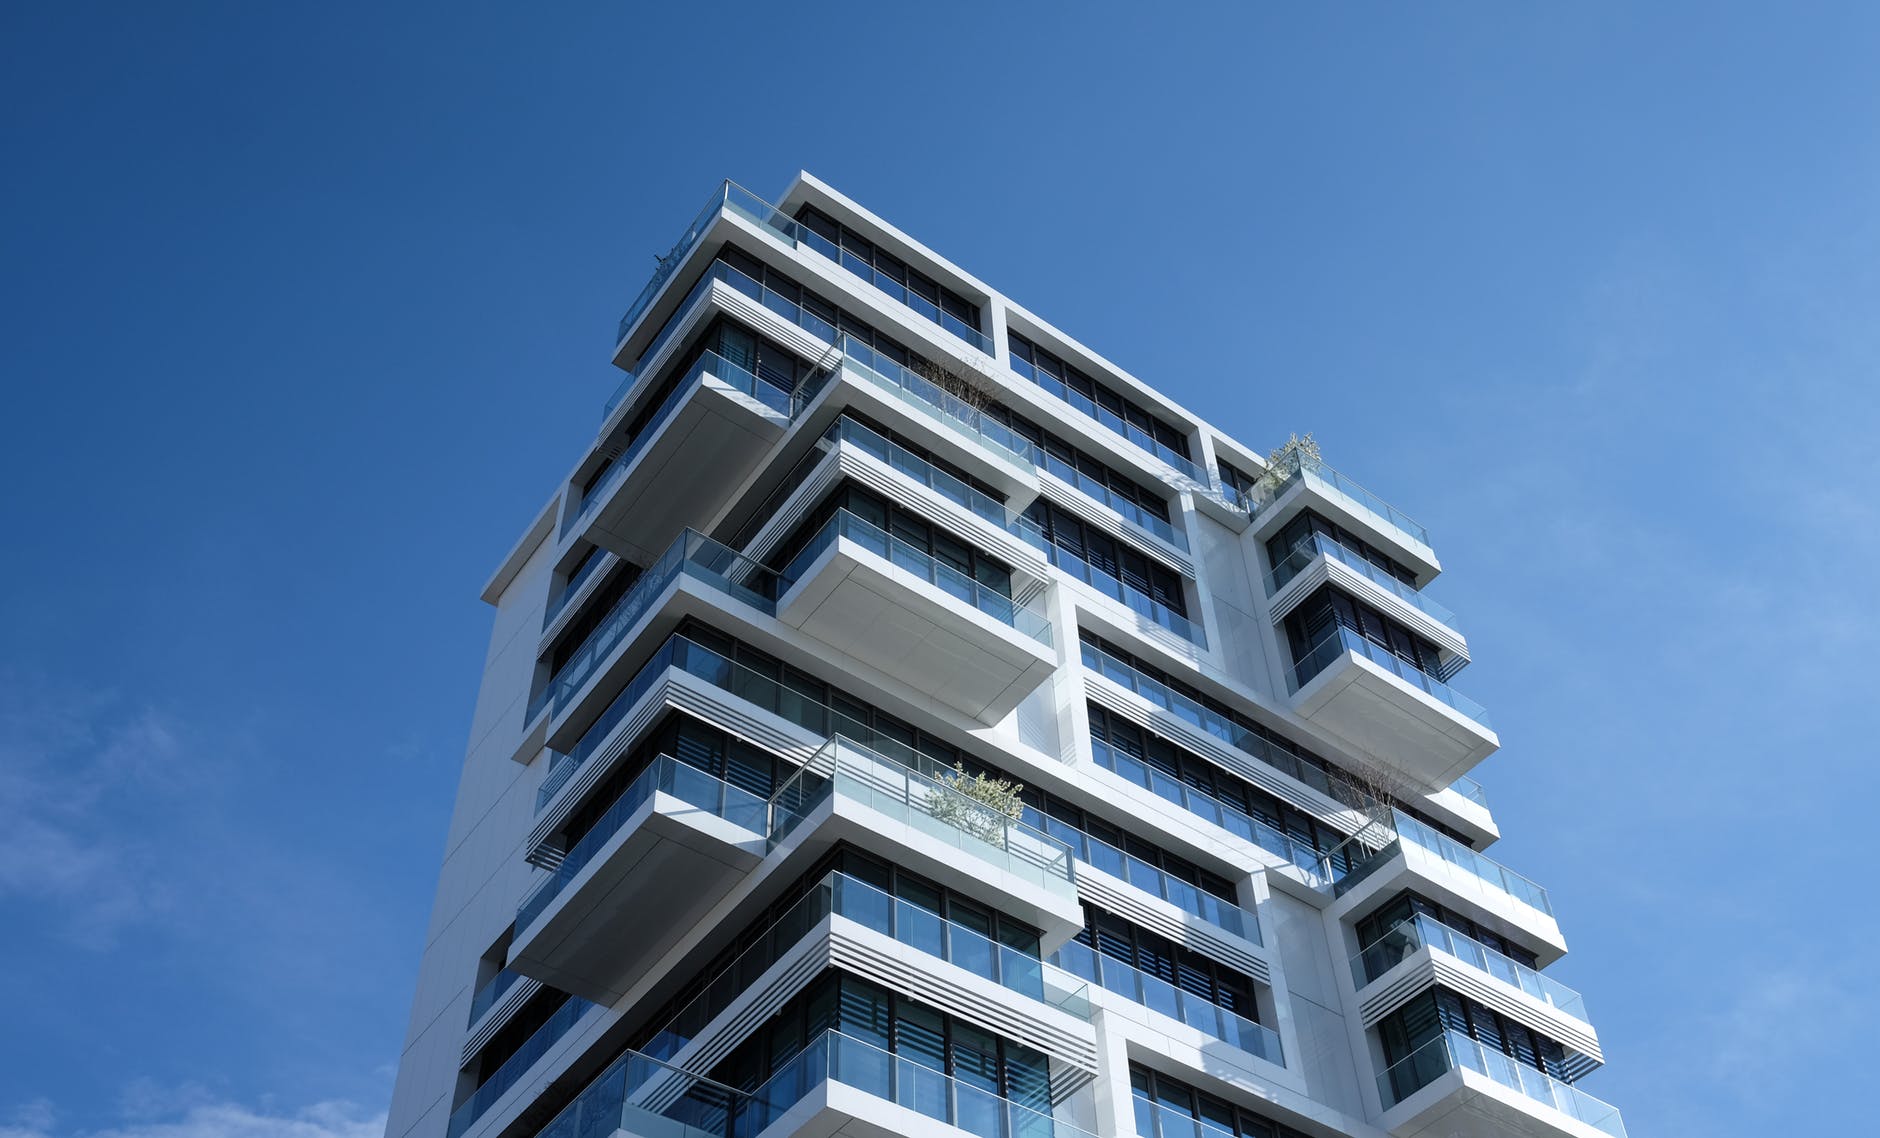 A modern building with balconies available for renting property against a blue sky.